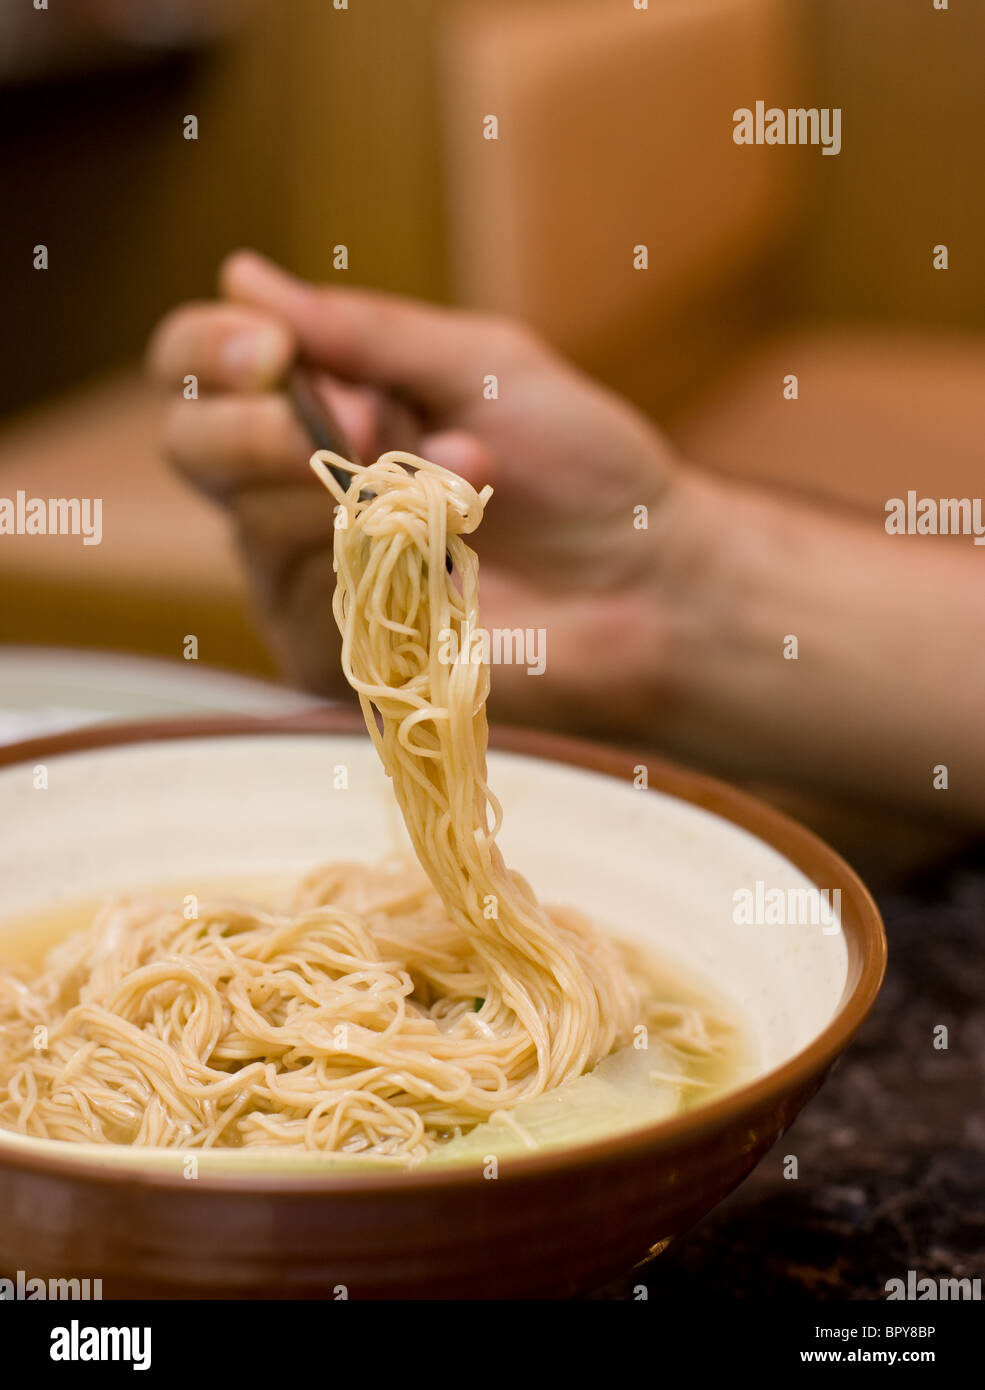 Shrimp wonton soup eaten with spoon and chopsticks at Chinese restaurant Stock Photo